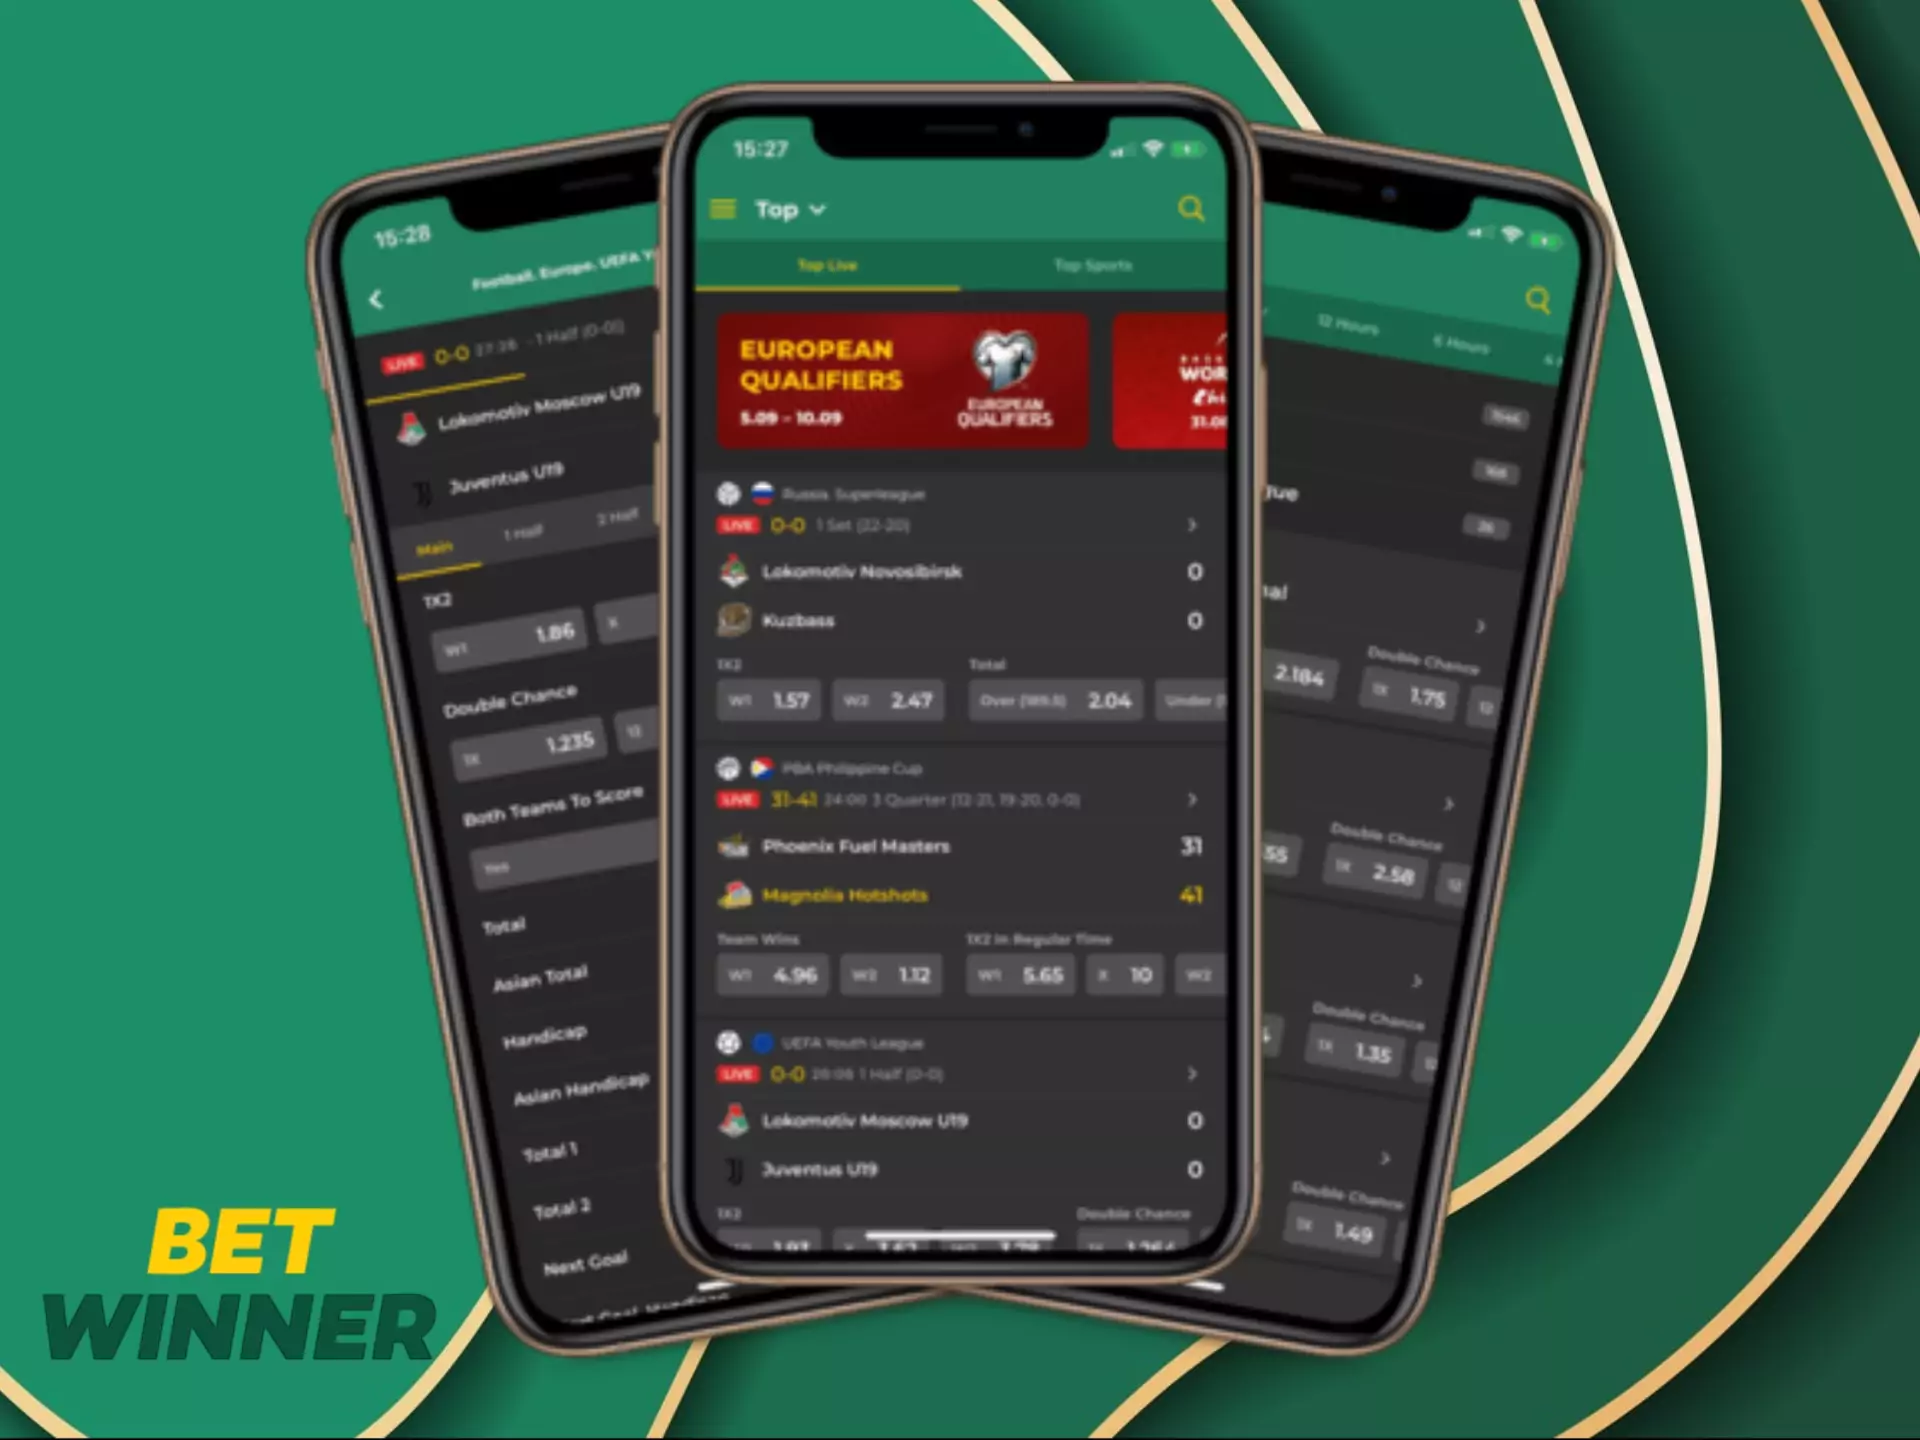 How I Improved My Betwinner APK In One Day